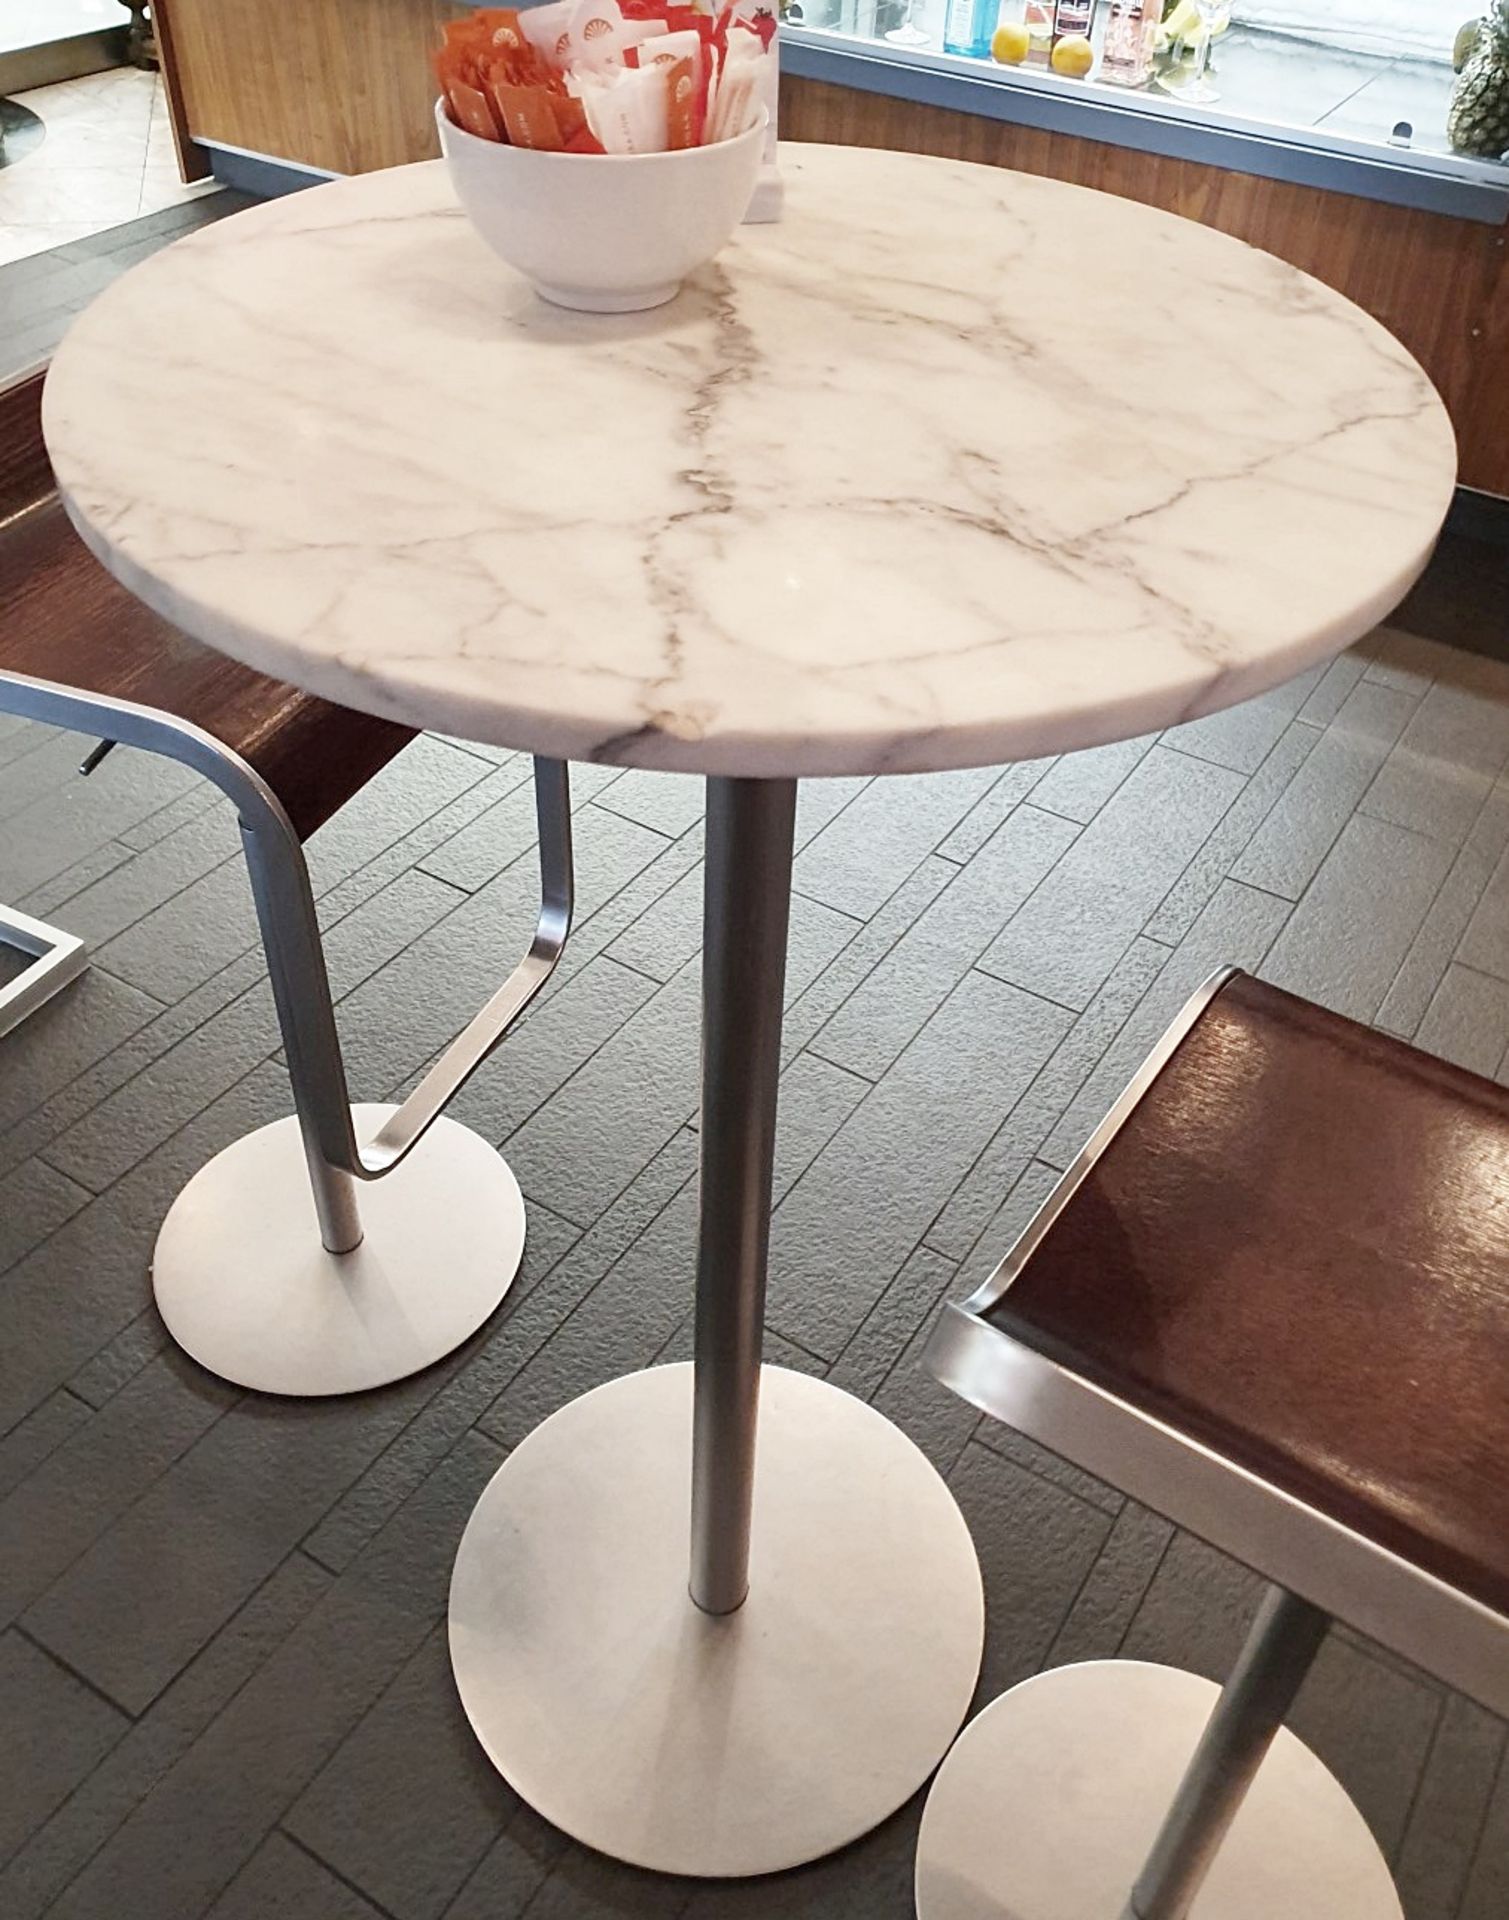 1 x Tall Round Marble/Granite Cocktail Bar Table - Dimensions: Diameter 60cm x Height 111cm - Ref: - Image 3 of 6